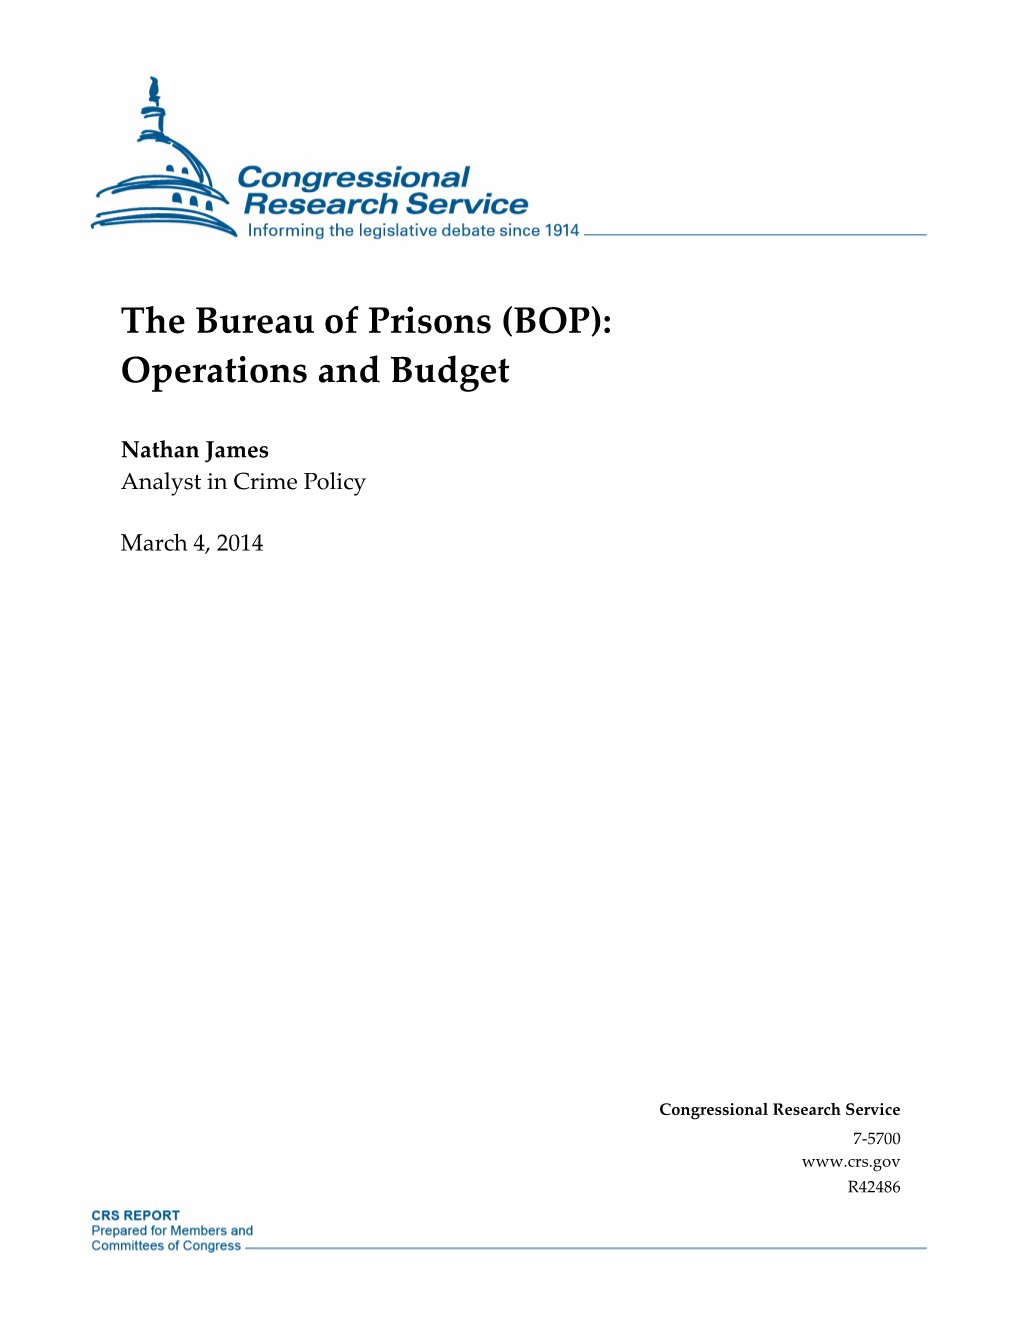 The Bureau of Prisons (BOP): Operations and Budget